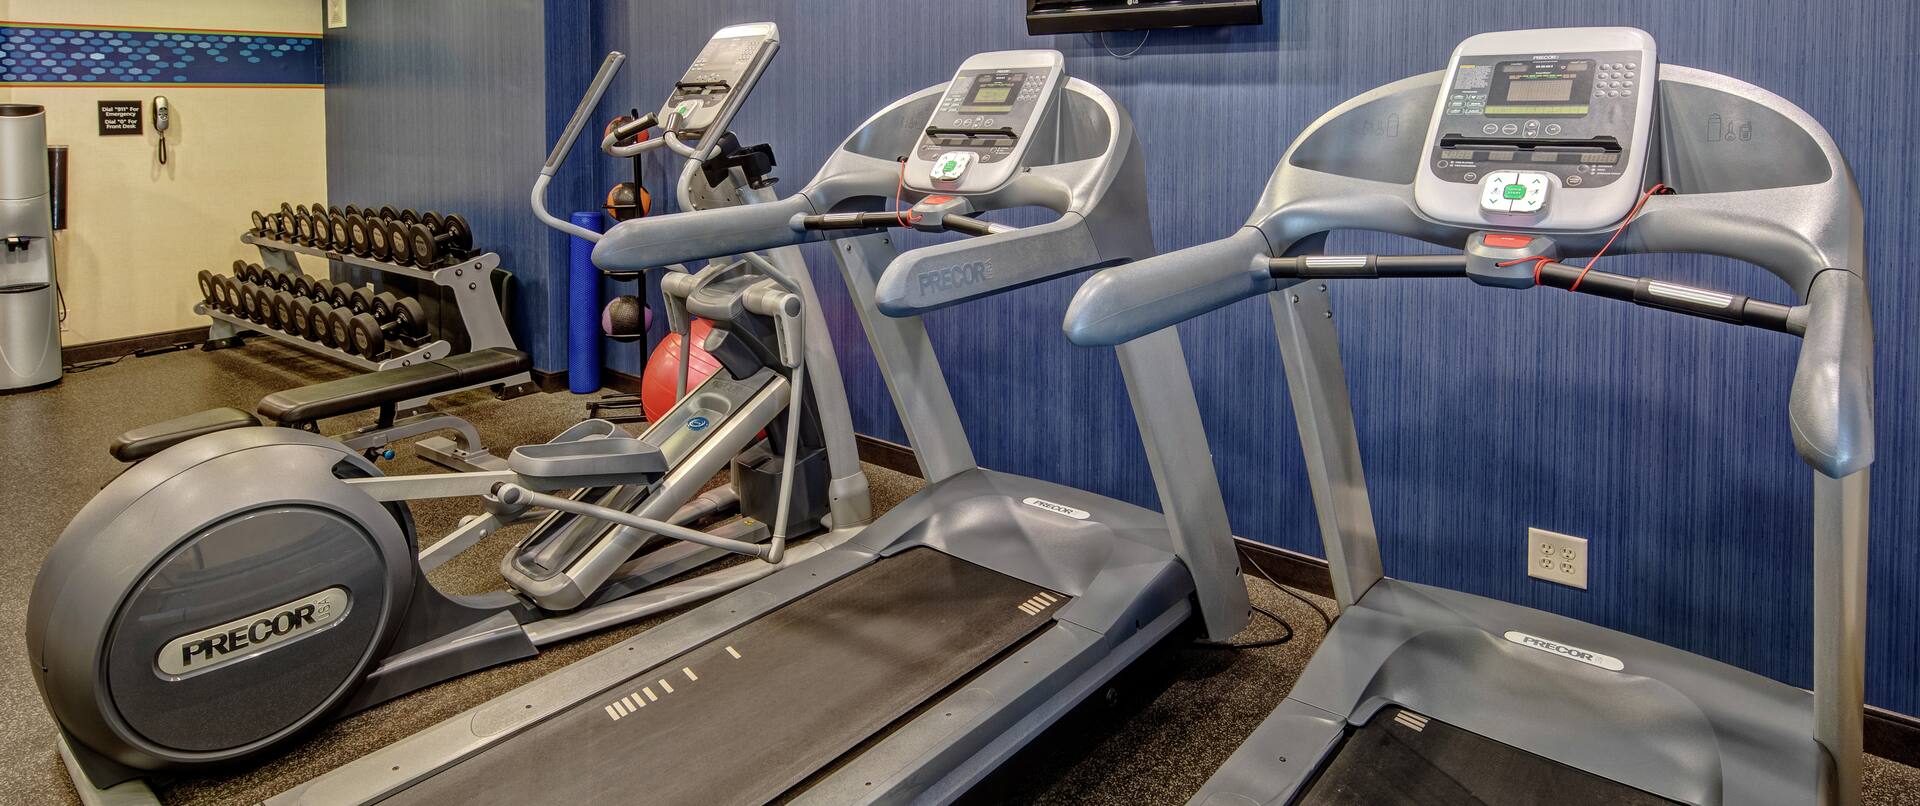 Close Up of Cardio Machines in Fitness Center